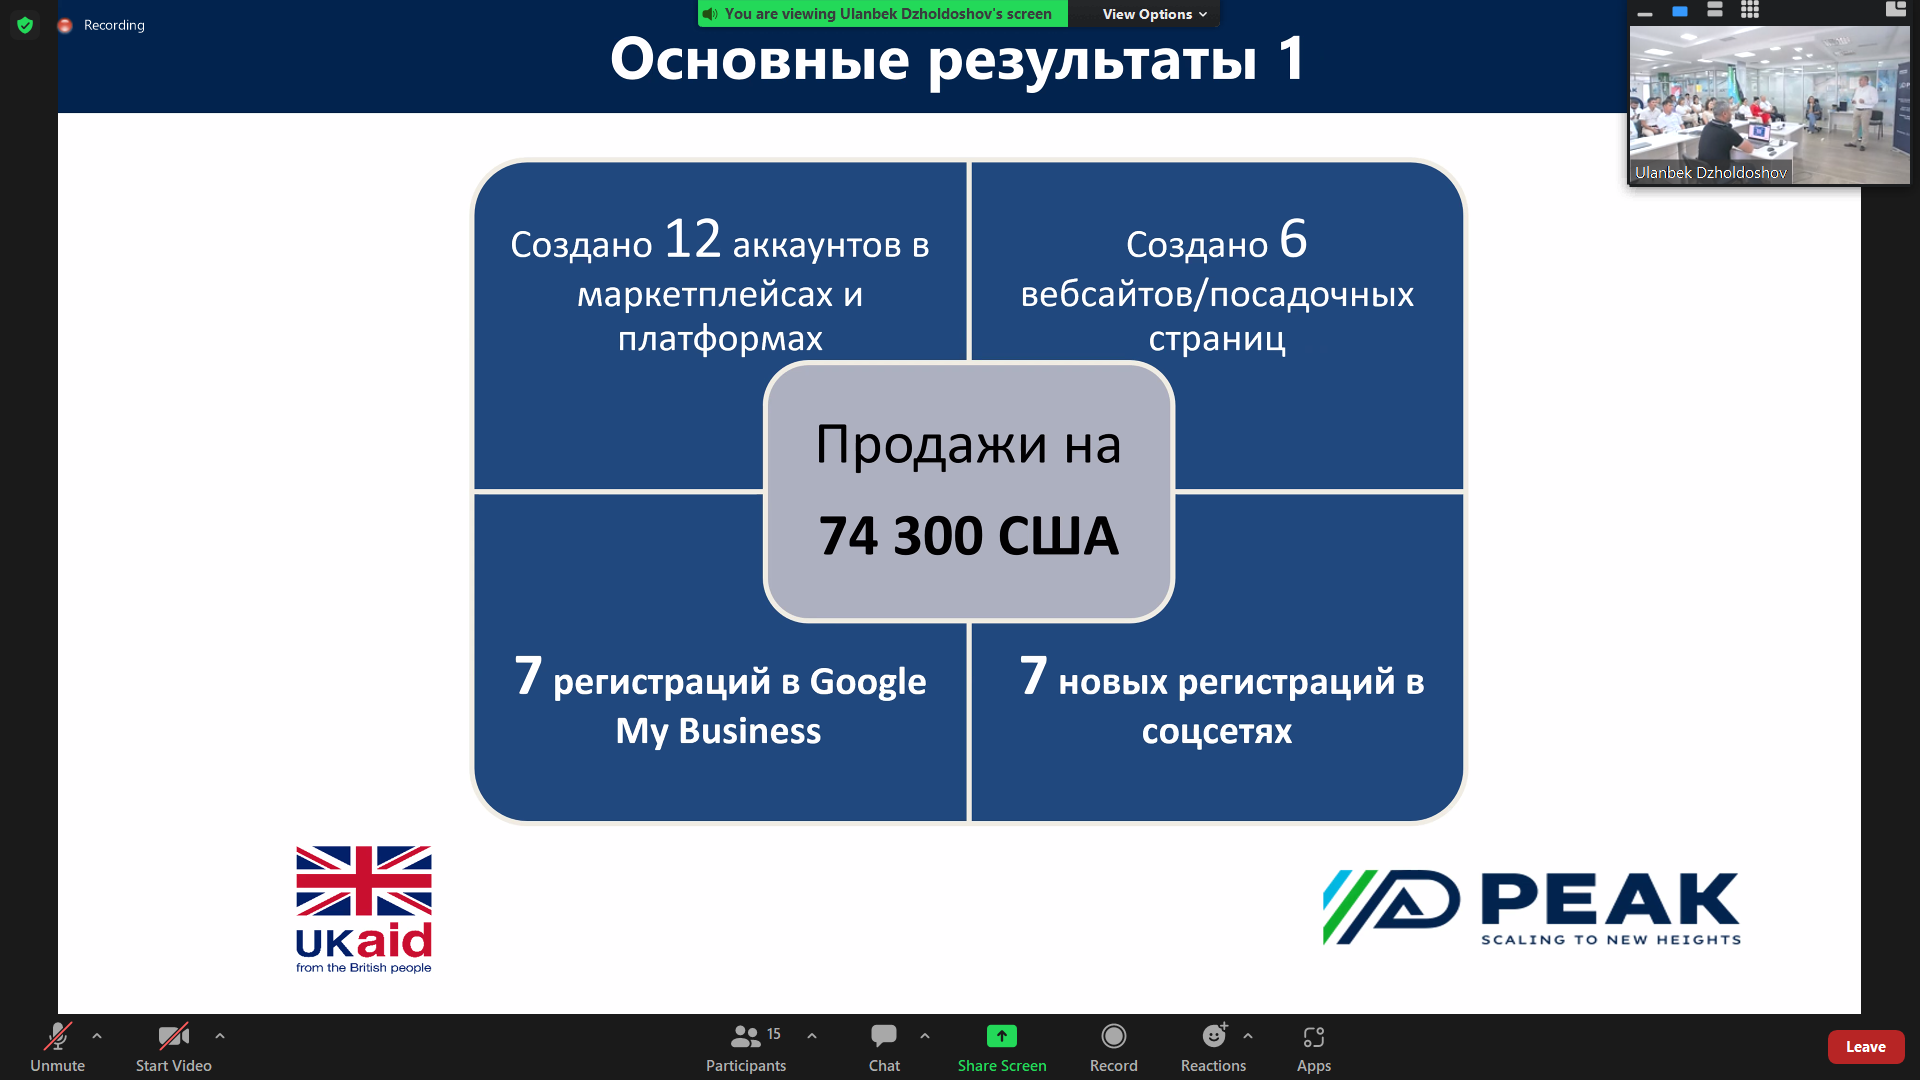 Results of ecommerce acceleration program